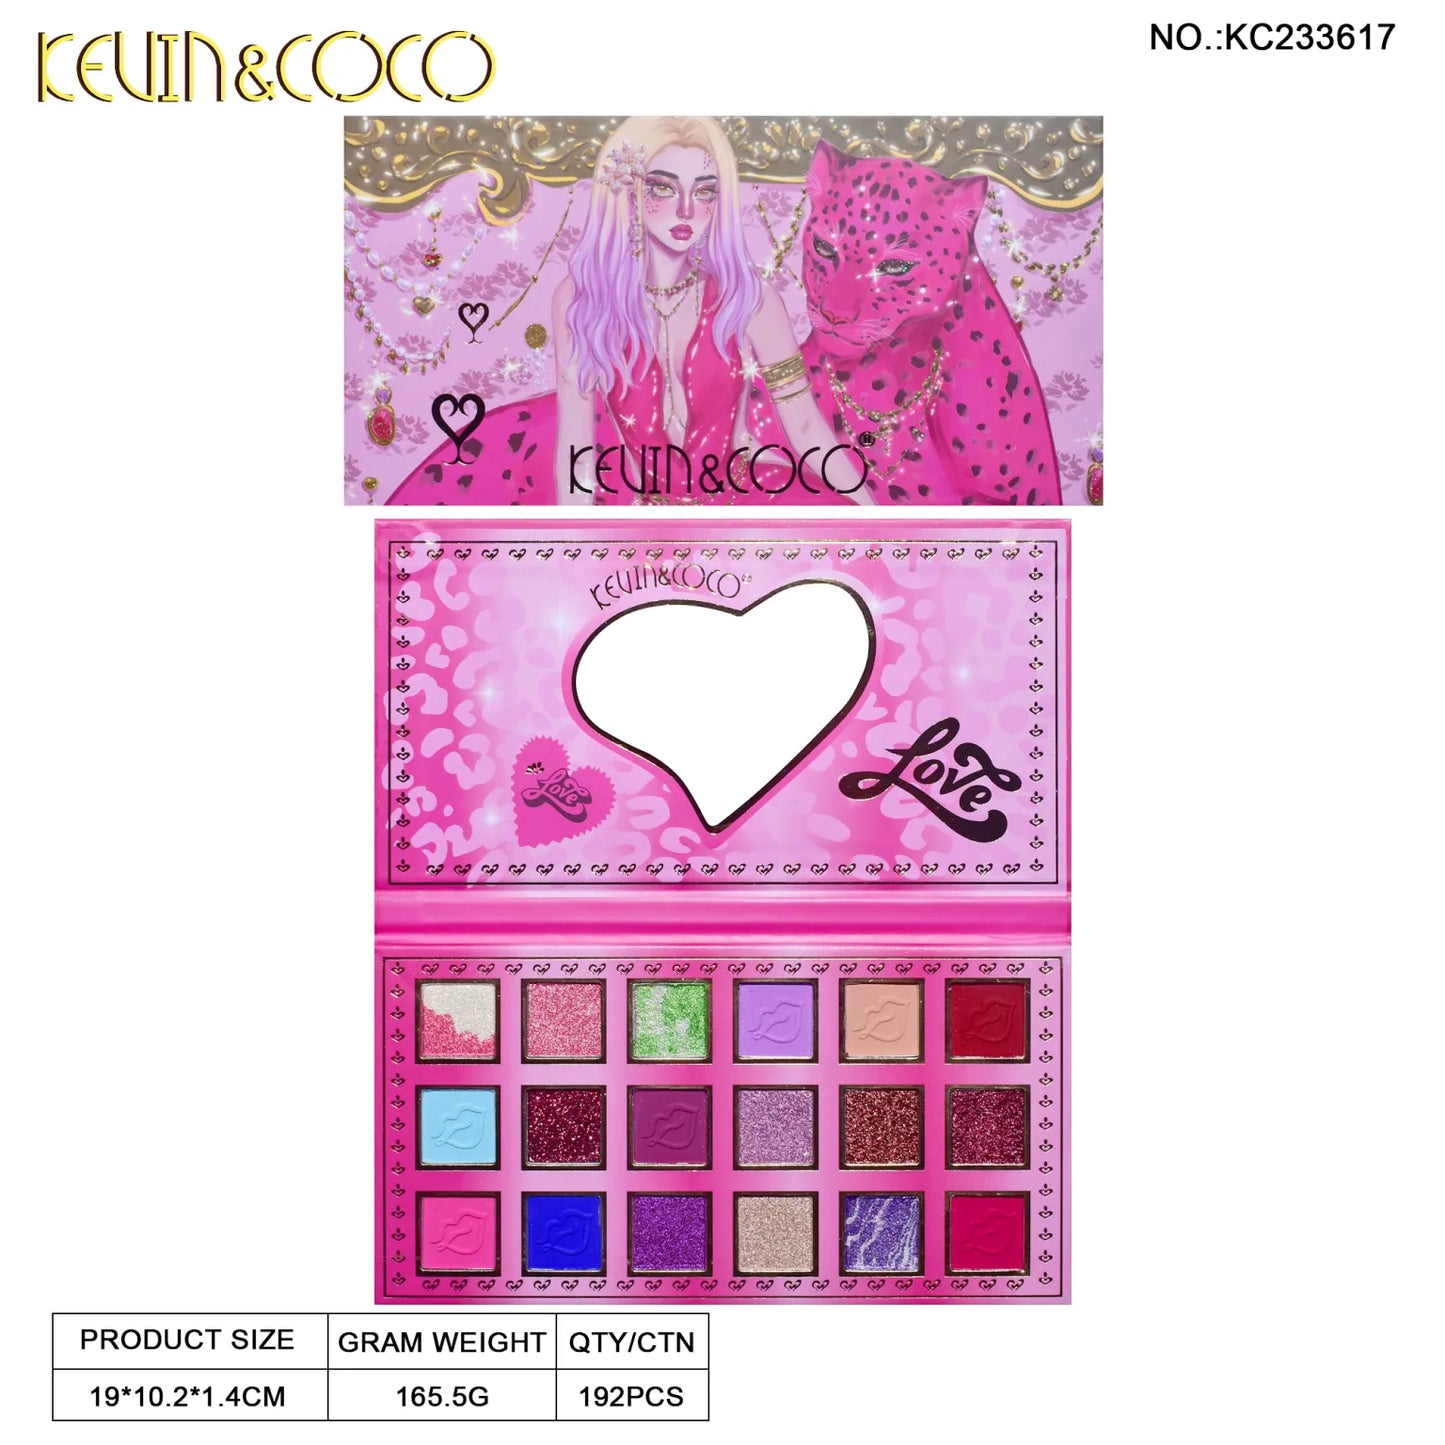 KEVIN AND COCO CHEETAH PALETTE KC233617 R14